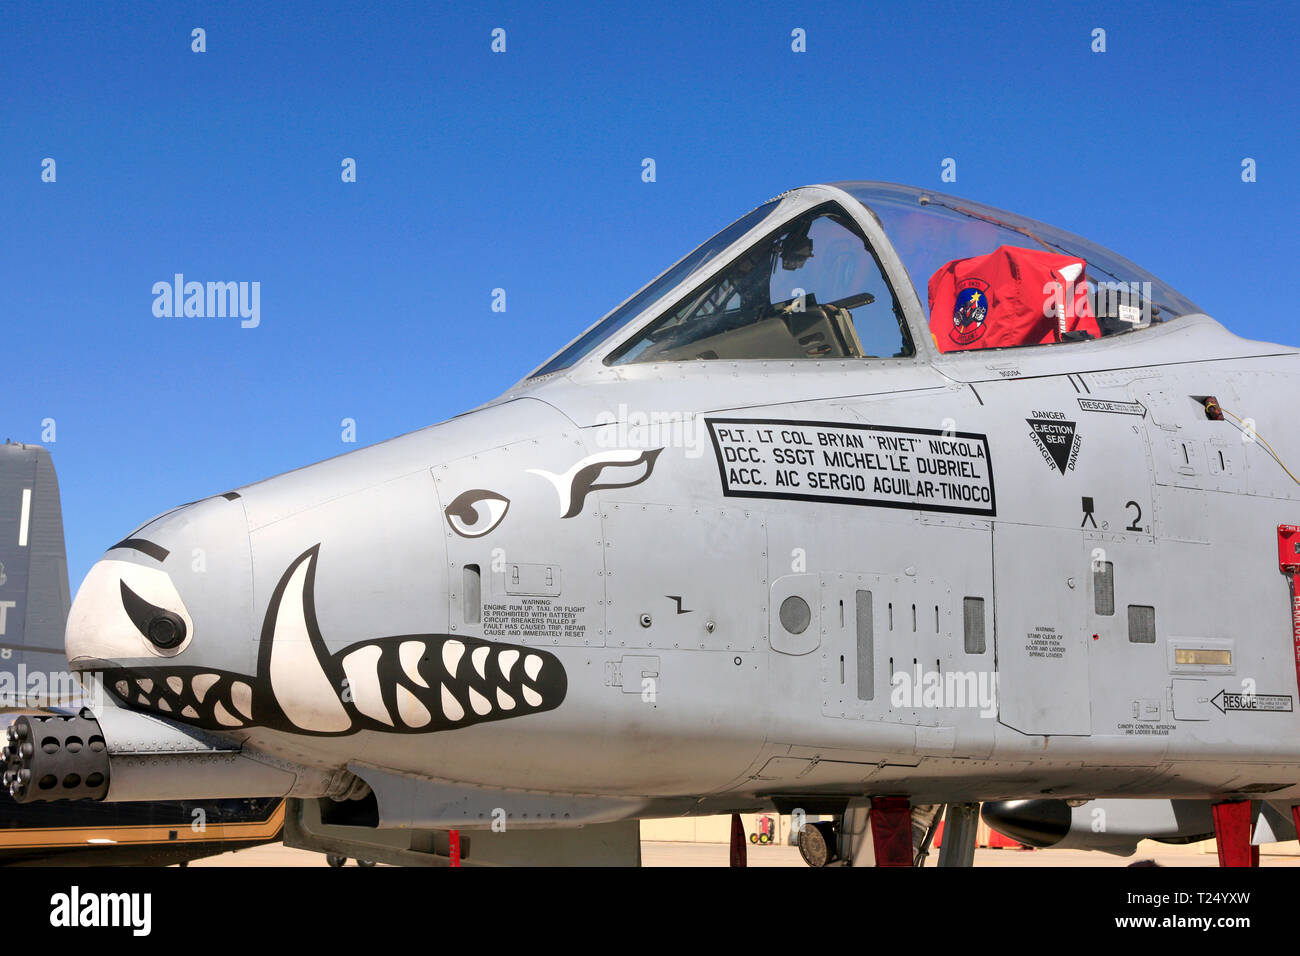 Up close and personal with the sharp end of an A-10 Warthog with its gattling gun and graphics at Davis-Monthan AFB in Tucson AZ Stock Photo